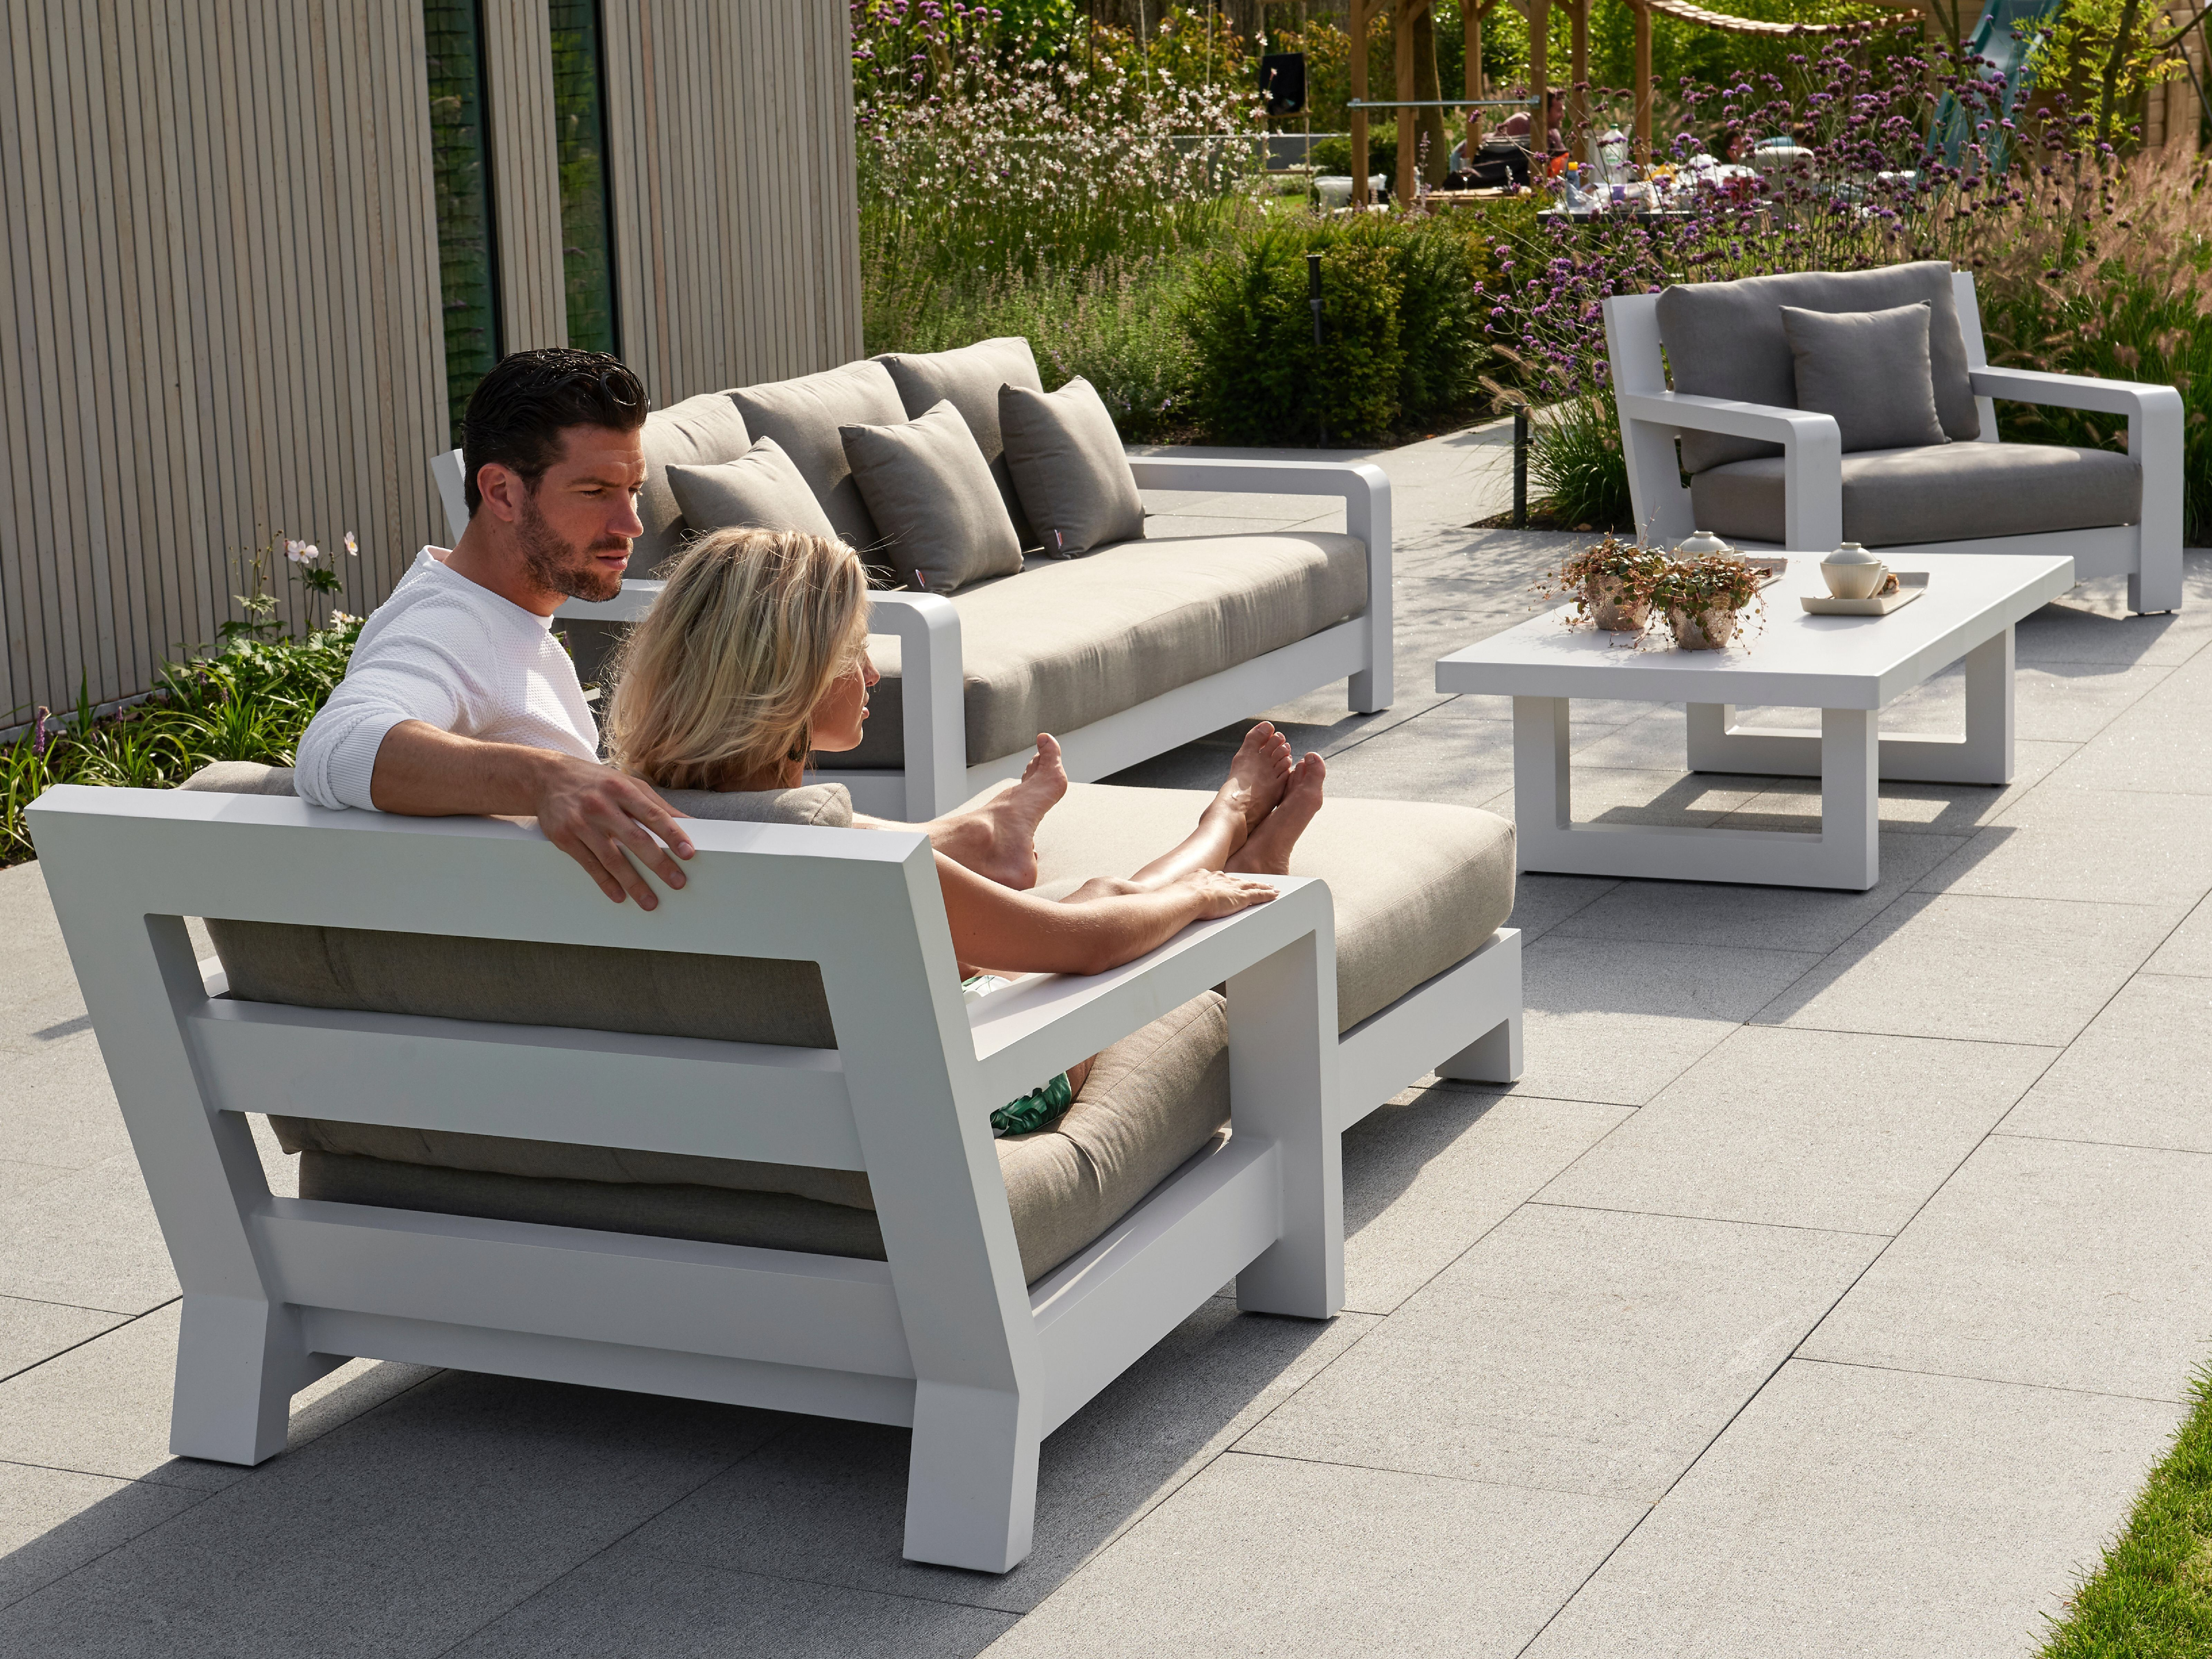 Modern Style Outdoor Furniture Nz Auckland Tauranga within measurements 6400 X 4800